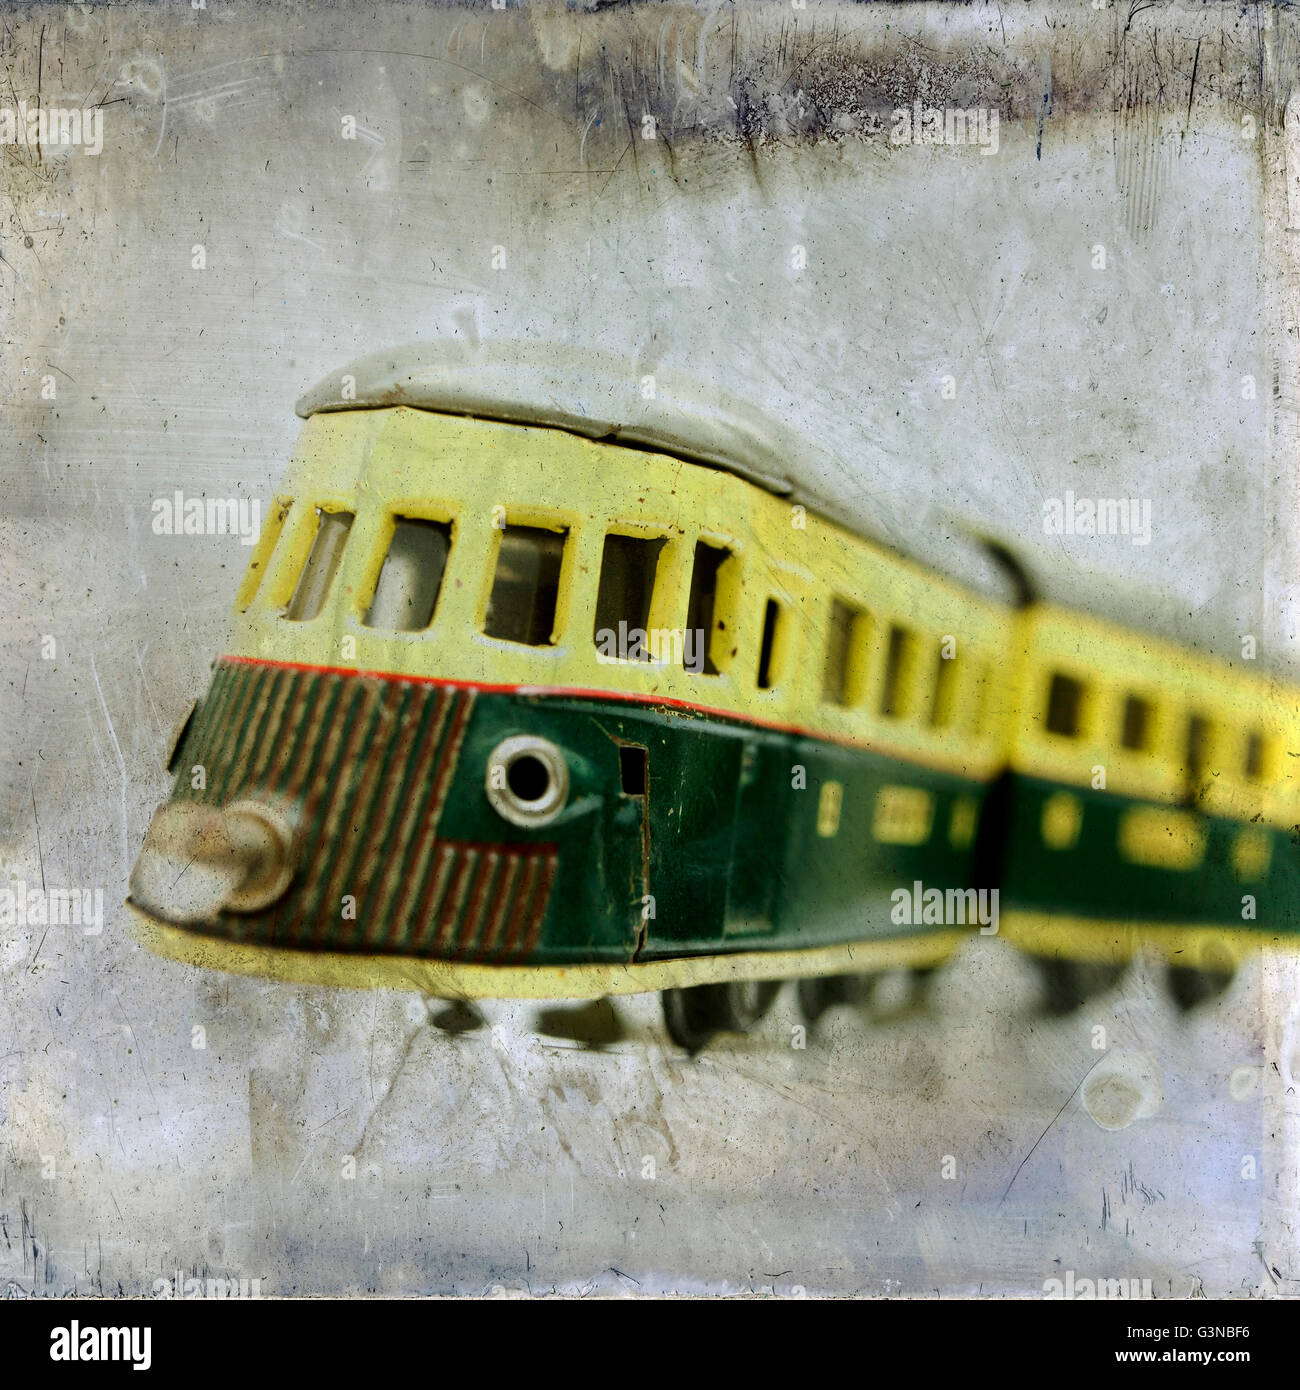 Old electric train, vintage look Stock Photo